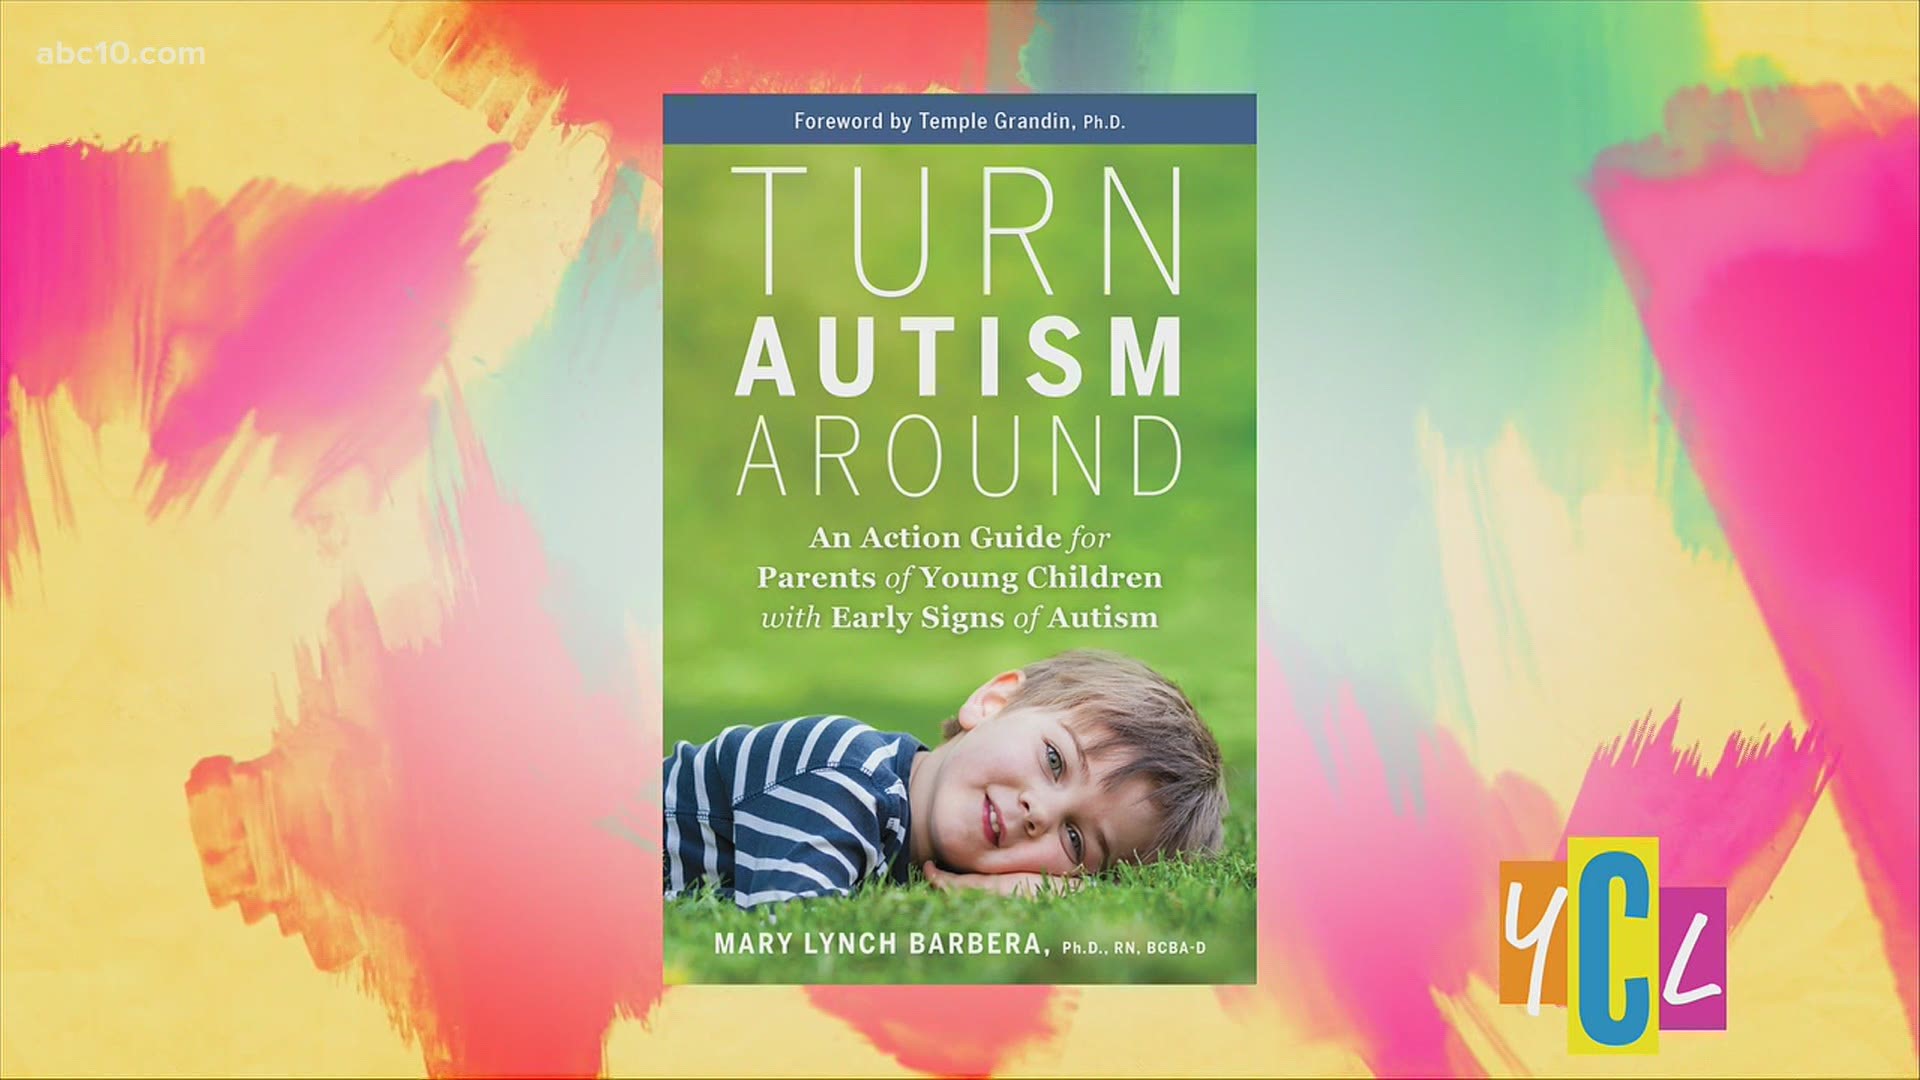 Behavior analyst and mother to an autistic son offers her insight on how parents can best support their child, and how to spot the early warning signs of autism.